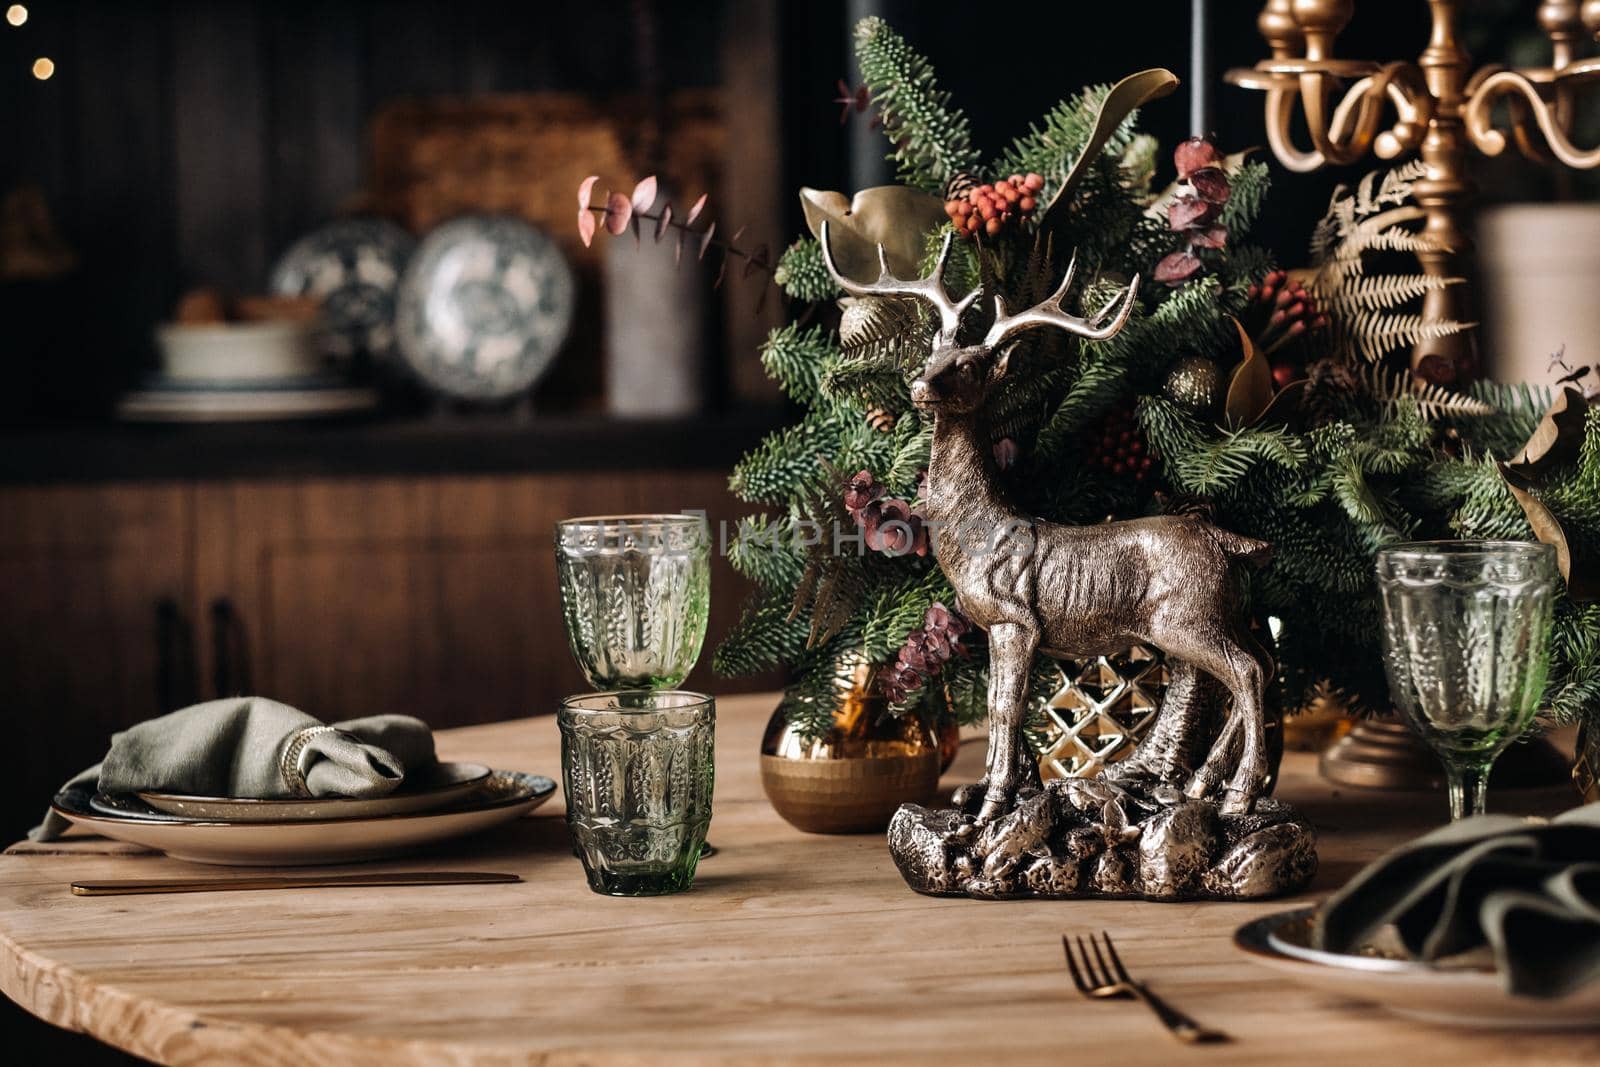 Christmas table decoration, Banquet table with glasses before serving food, Close-up of Christmas dinner table with seasonal decorations, crystal glasses and decorative deer.